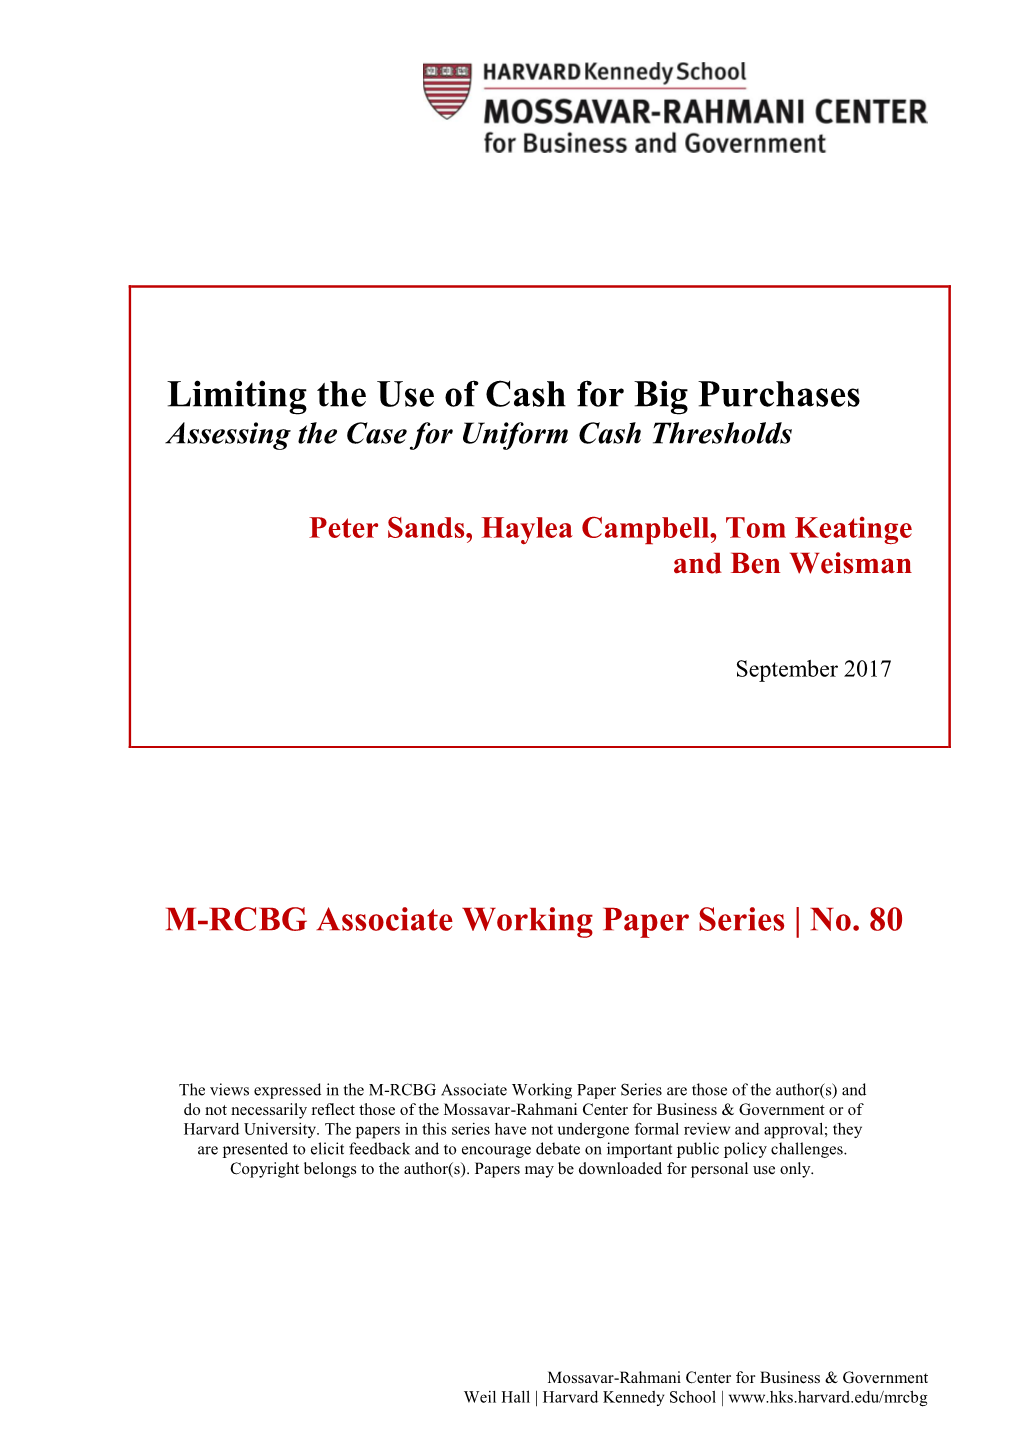 Limiting the Use of Cash for Big Purchases Assessing the Case for Uniform Cash Thresholds